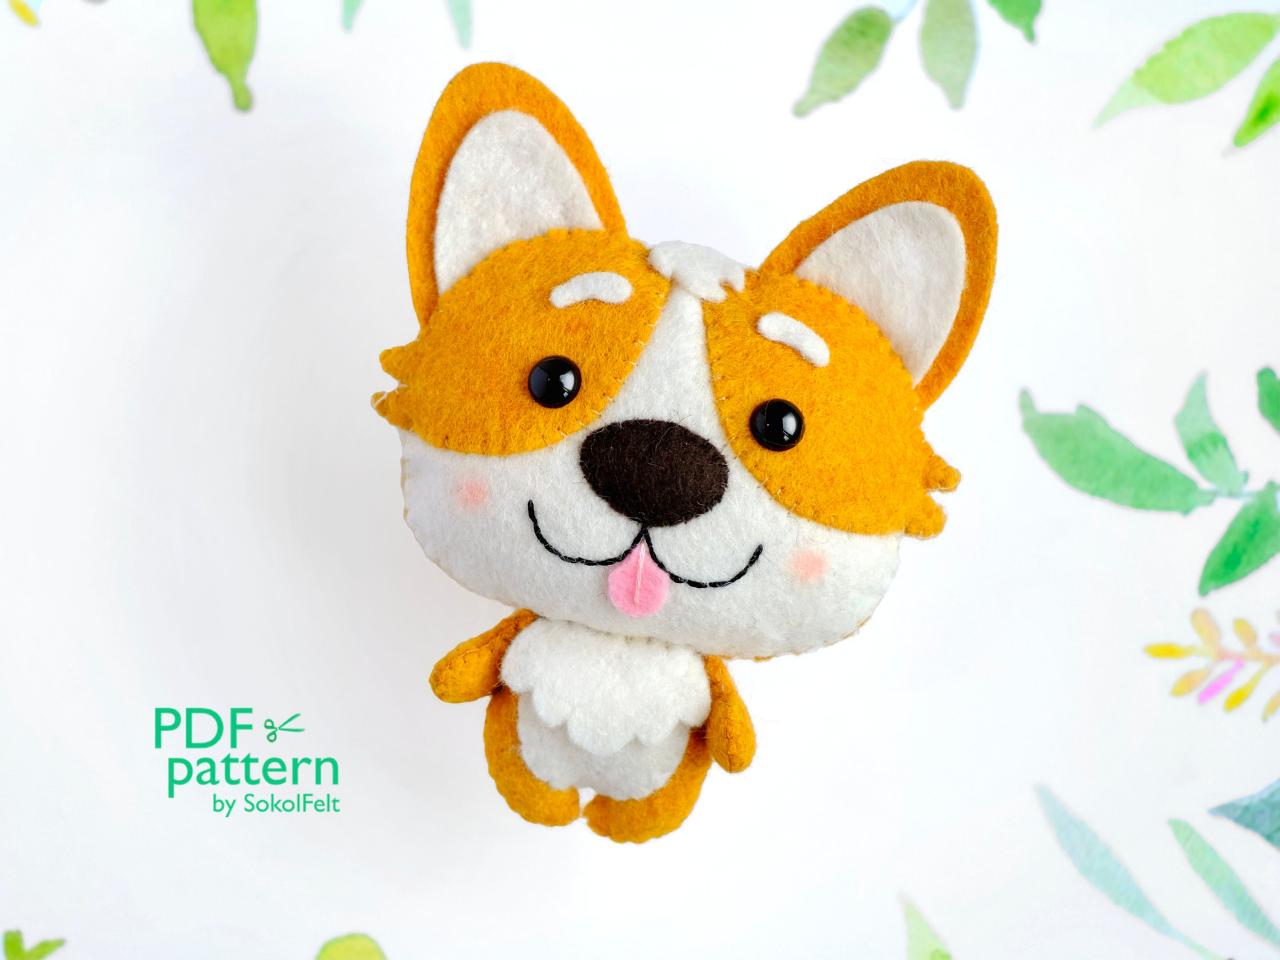 Corgi Felt Toy Sewing Pdf And Svg Patterns, Cute Dog Sewing Tutorial, Dog Lover Gift, Baby Crib Mobile Toy